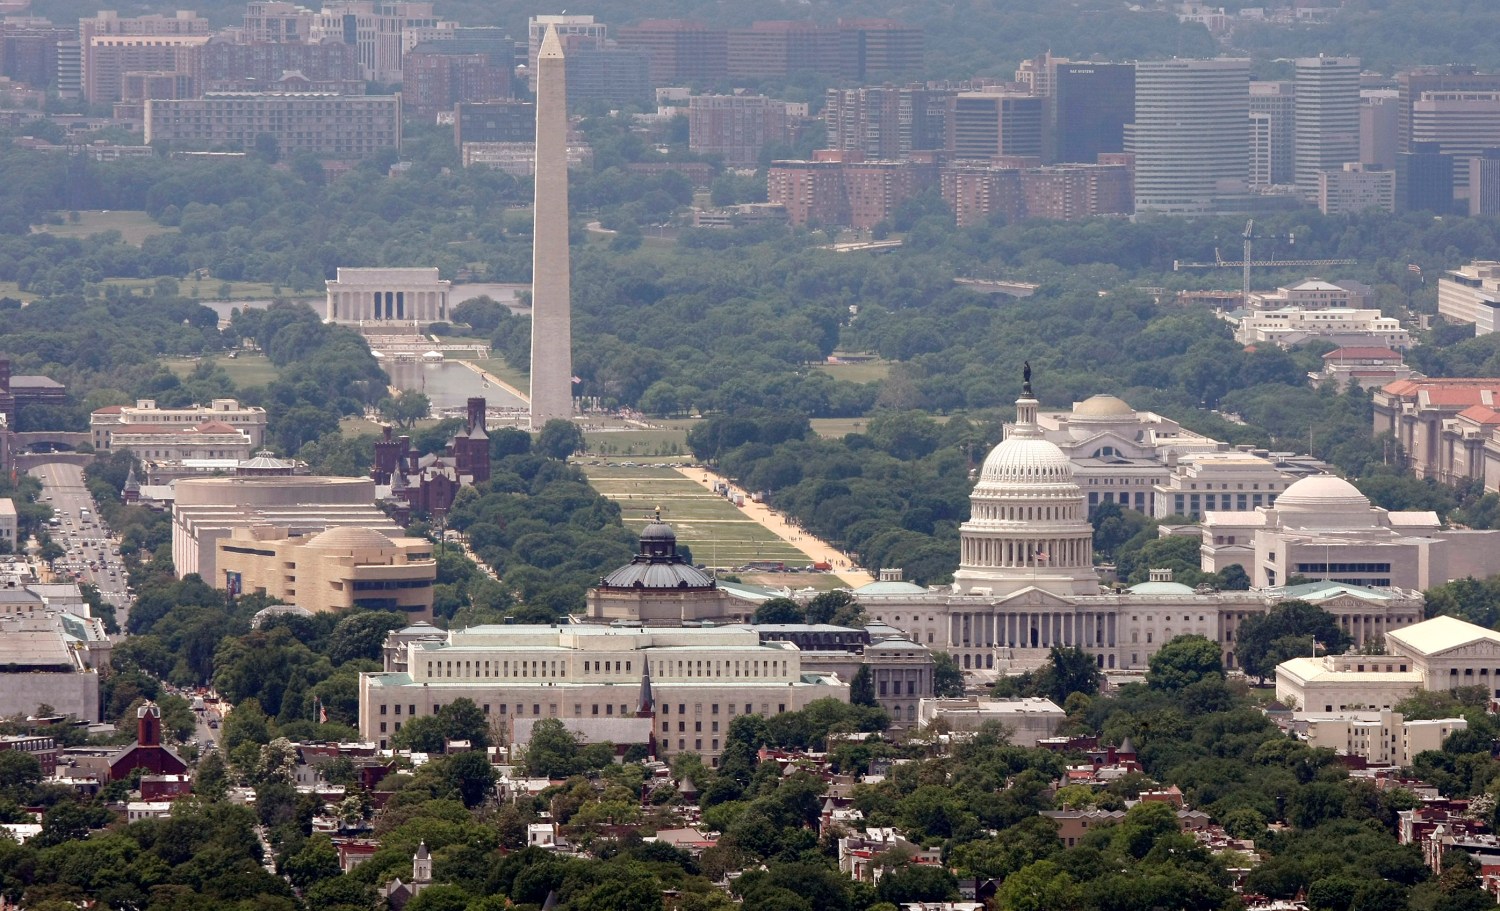 The skyline of Washington DC looking at the U.S. Capitol and the Mall, May 22, 2009. REUTERS/Larry Downing (UNITED STATES POLITICS CITYSCAPE) - RTXLKGE